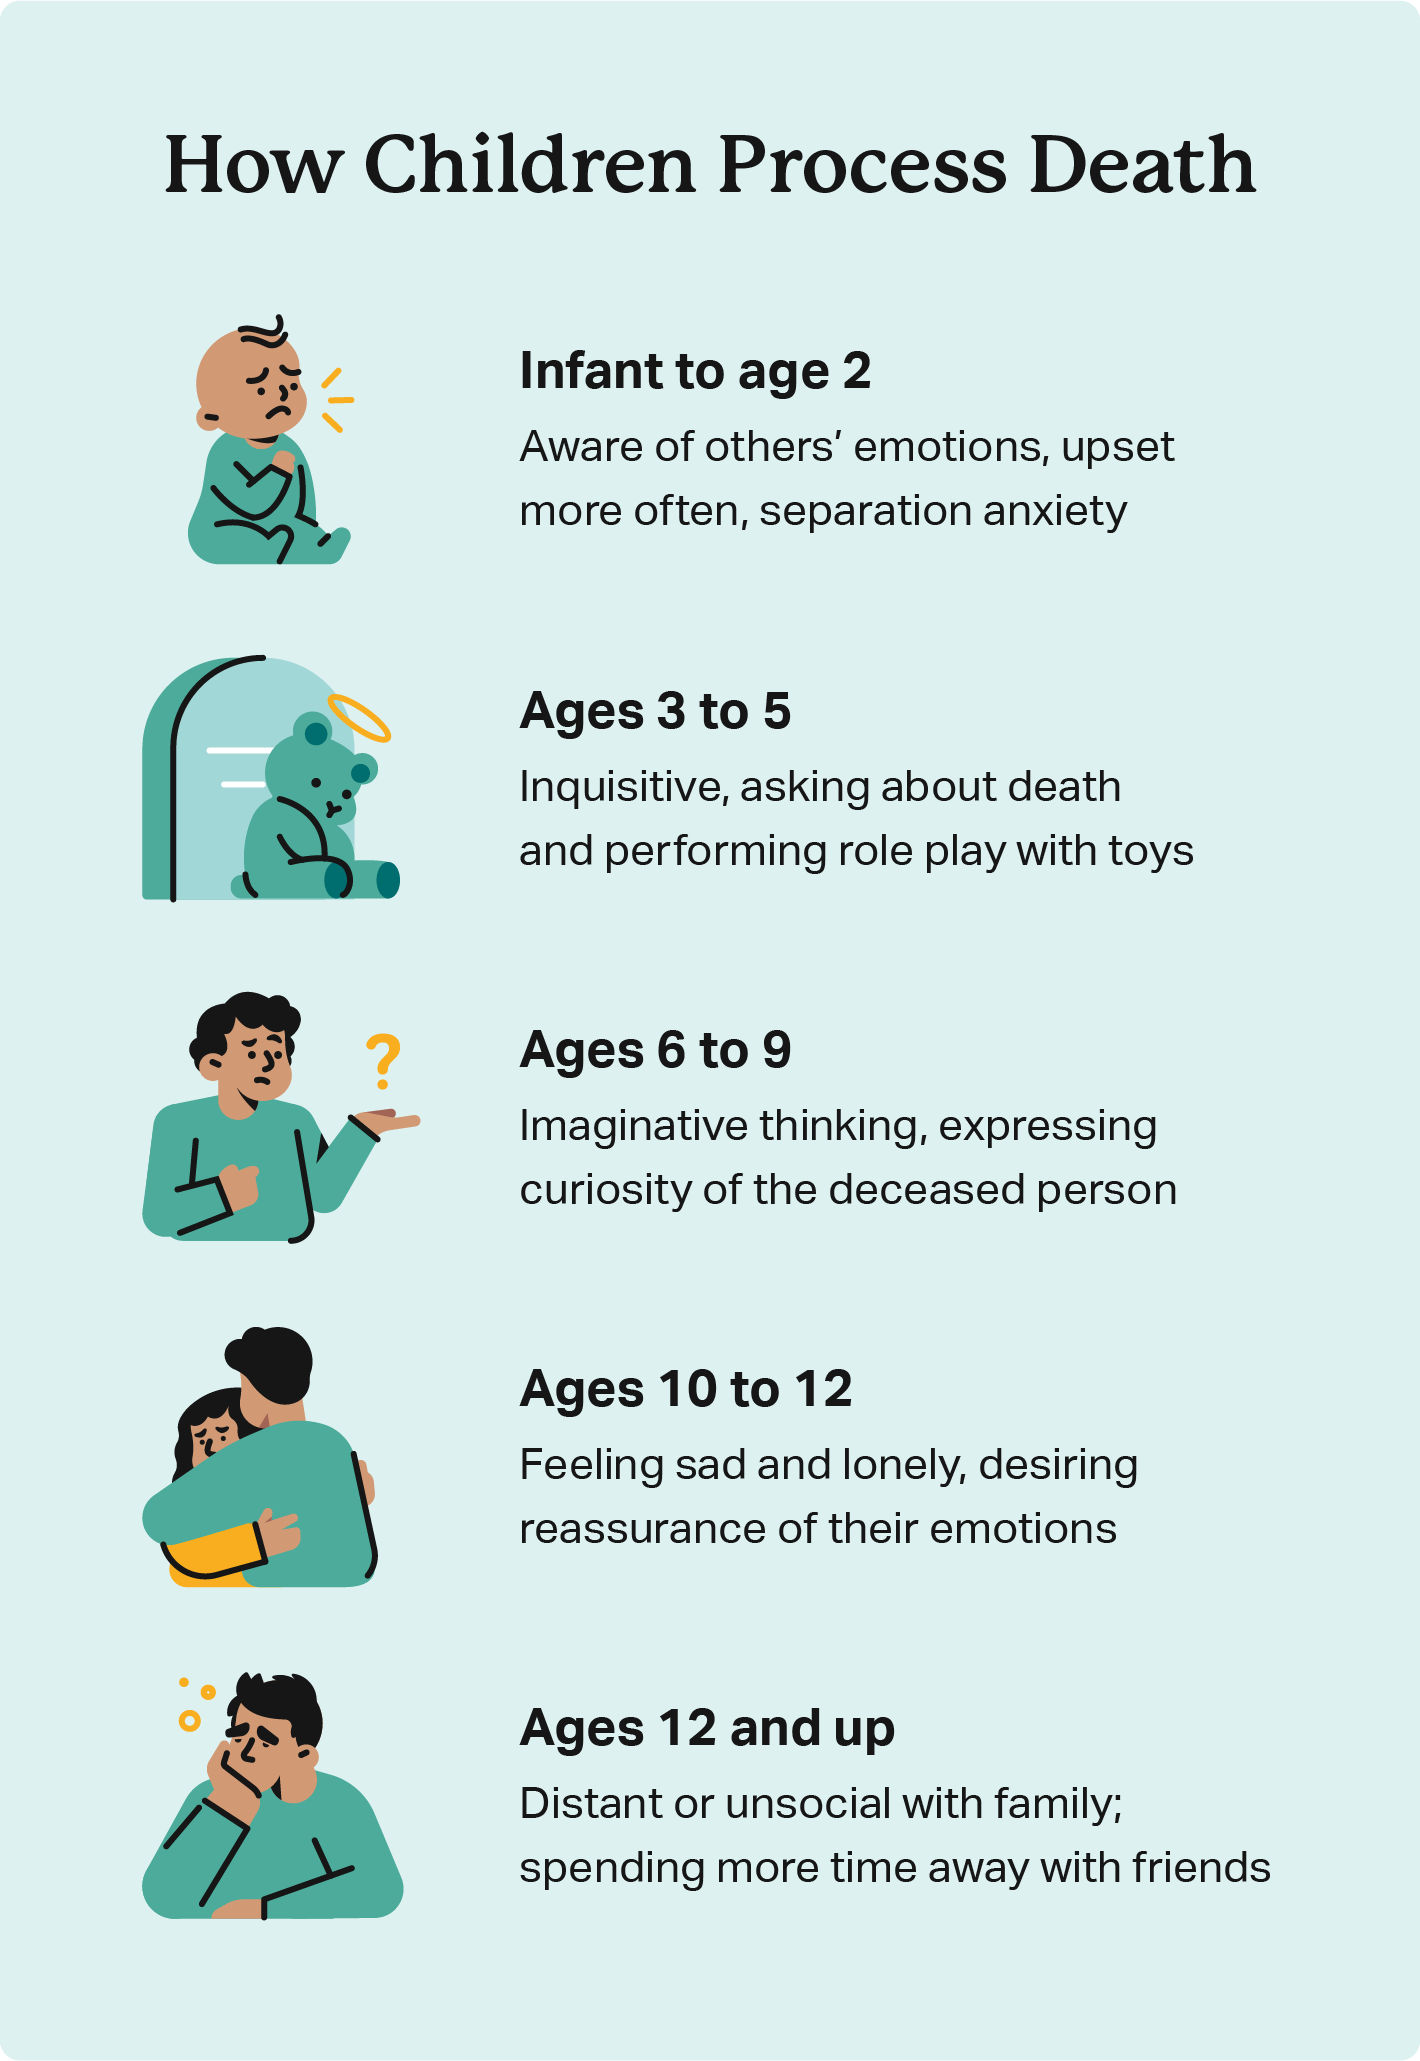 how children process death at different ages